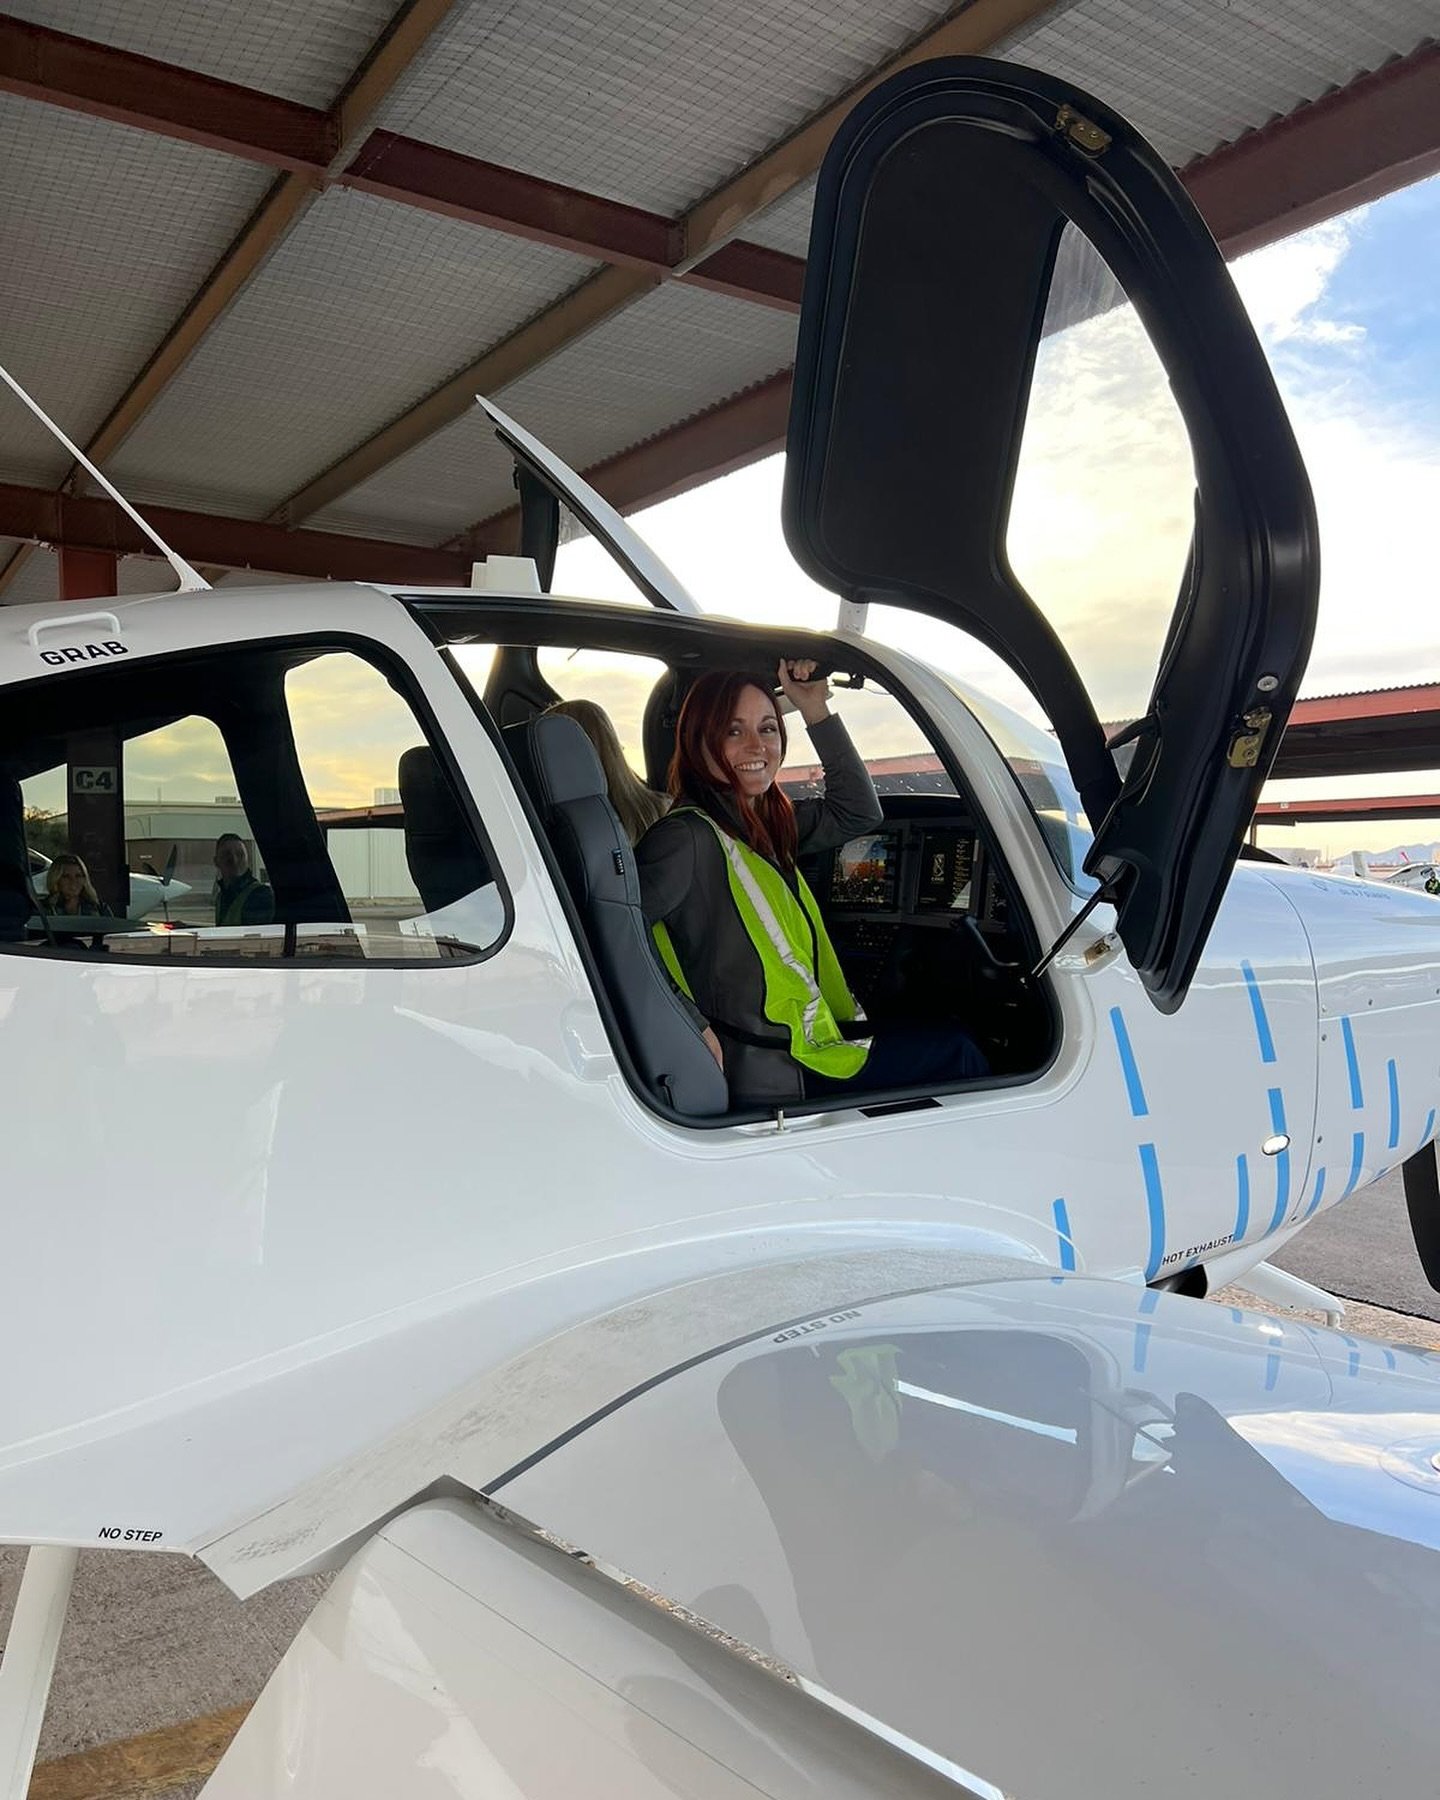 Congratulations to our Eco-Aviator Scholarship winner Megan at @unitedaviateacademy !

As a flight attendant for many years, Megan did the great individual work of separating recyclables, encouraging her crew to recycle, bringing her own reusable wat